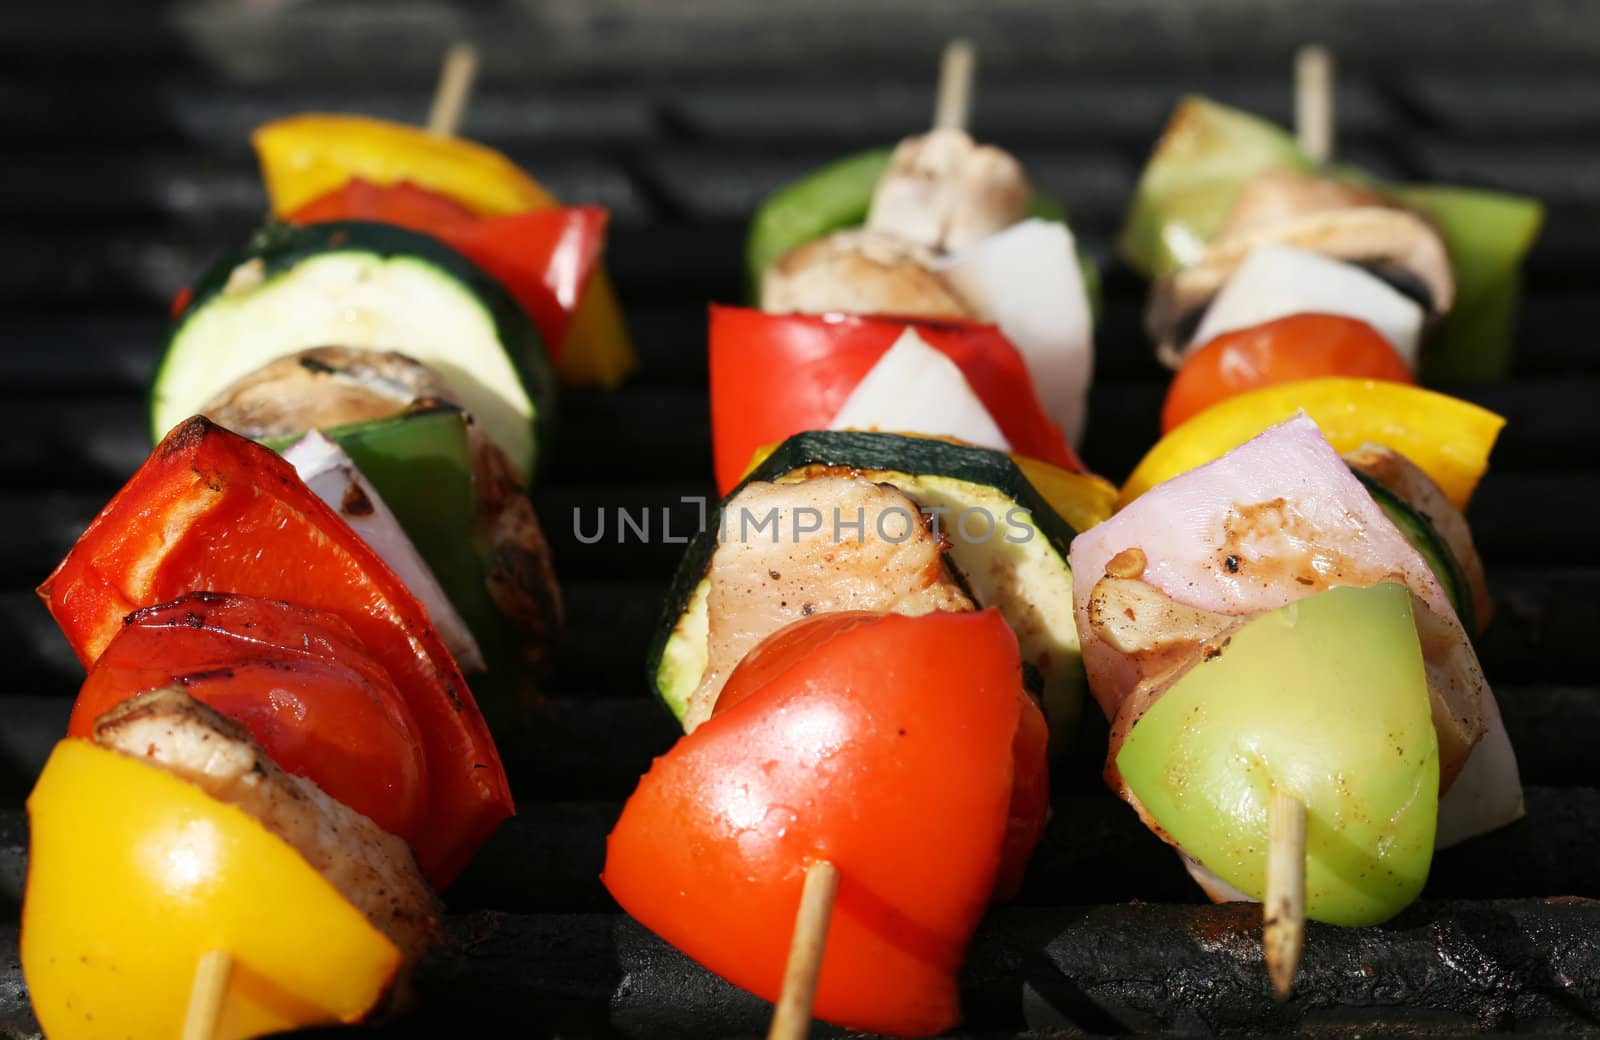 Grilling kabobs during a summer picnic at the park